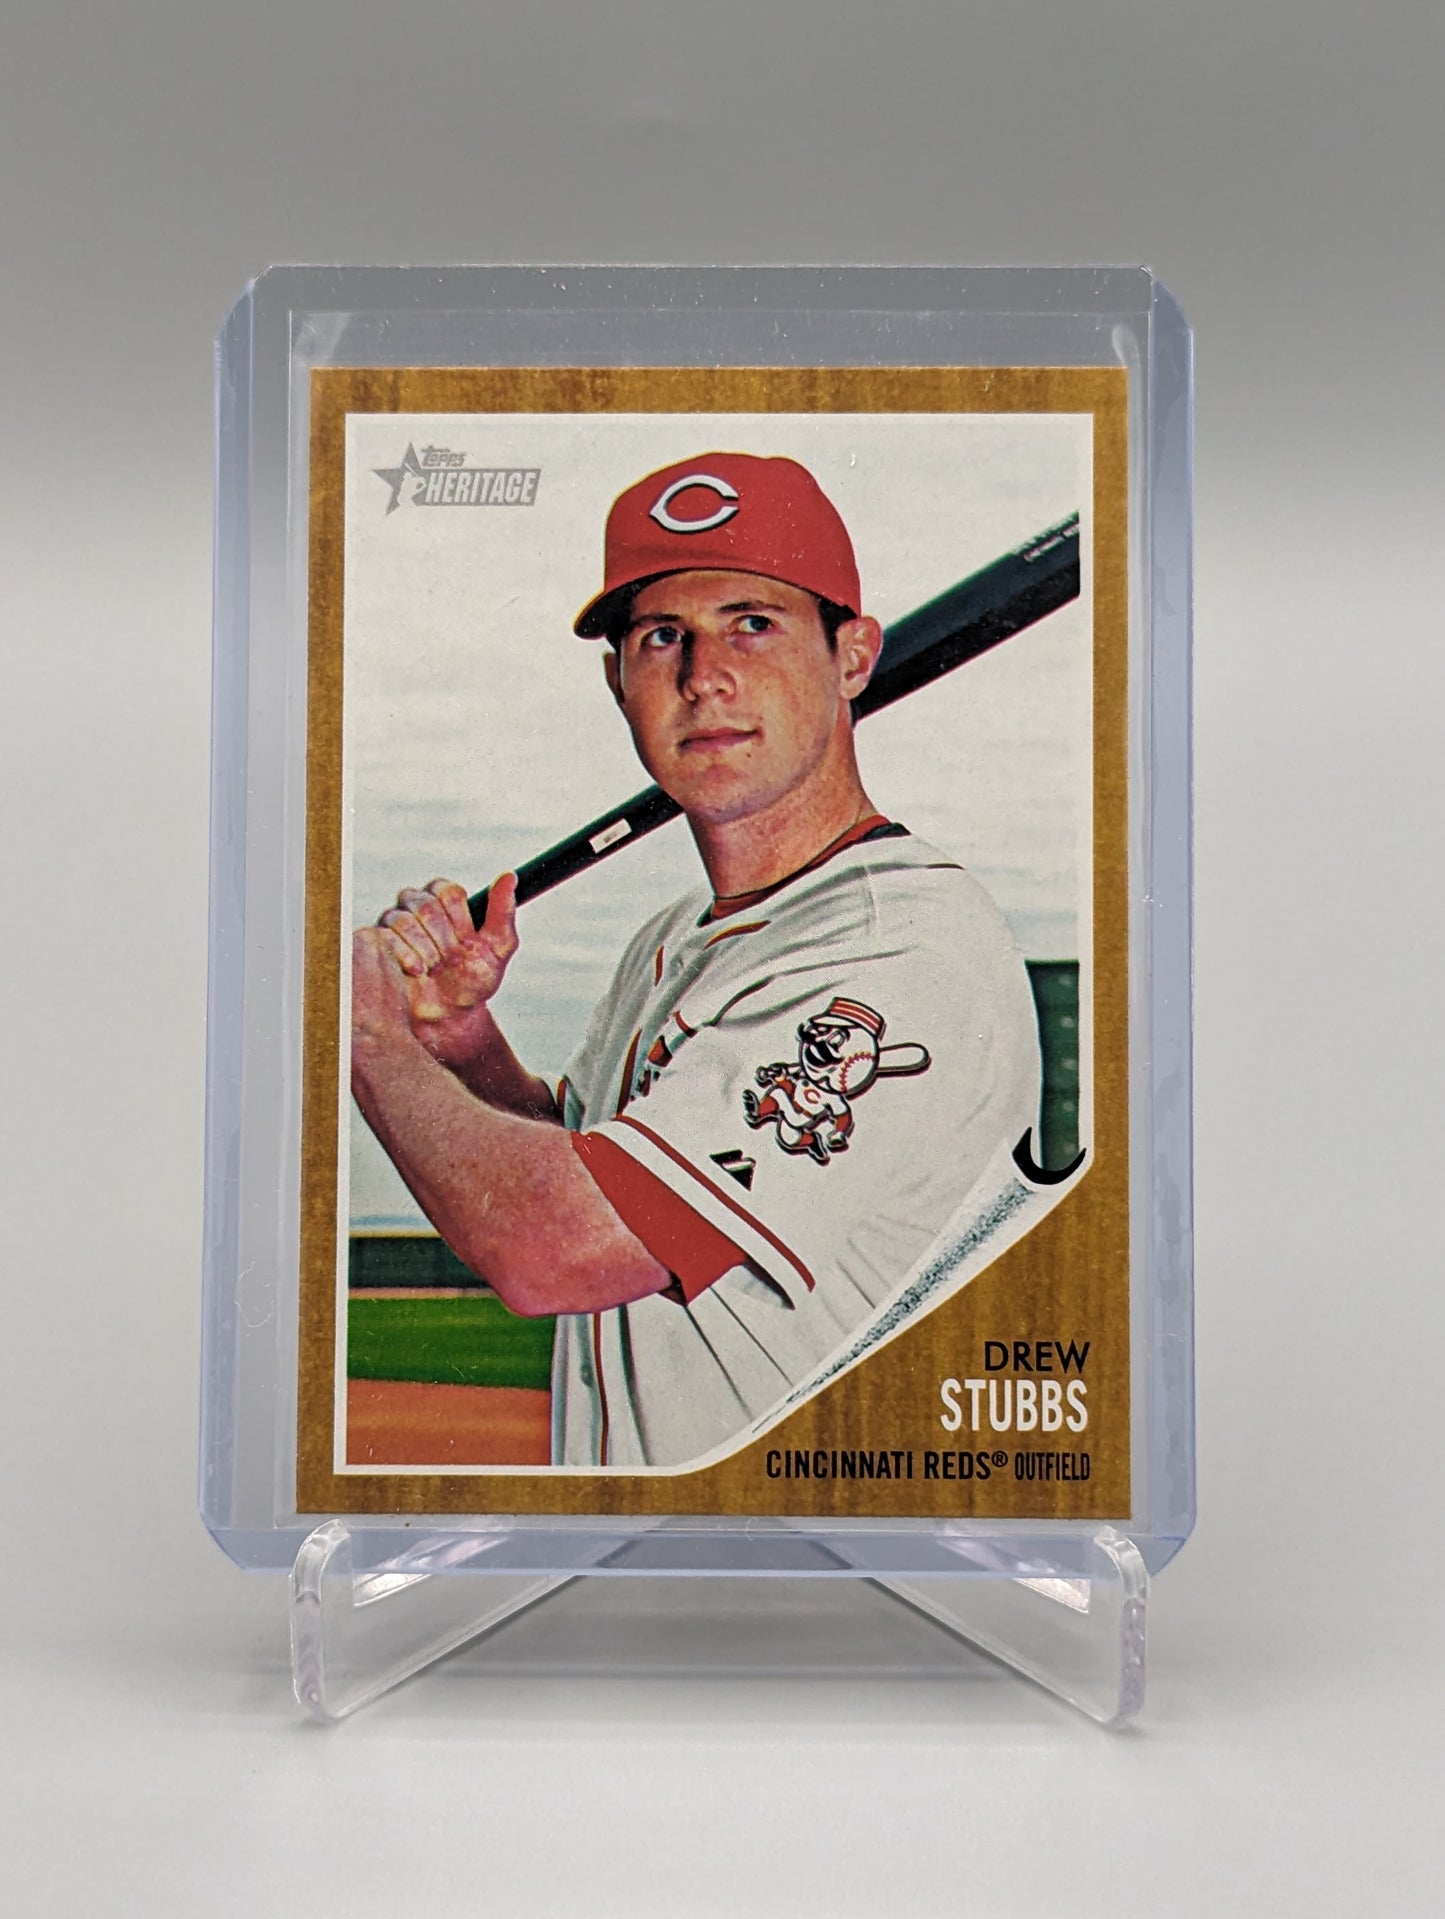 2011 Topps Heritage High Number Short Print SP #487 Drew Stubbs Reds